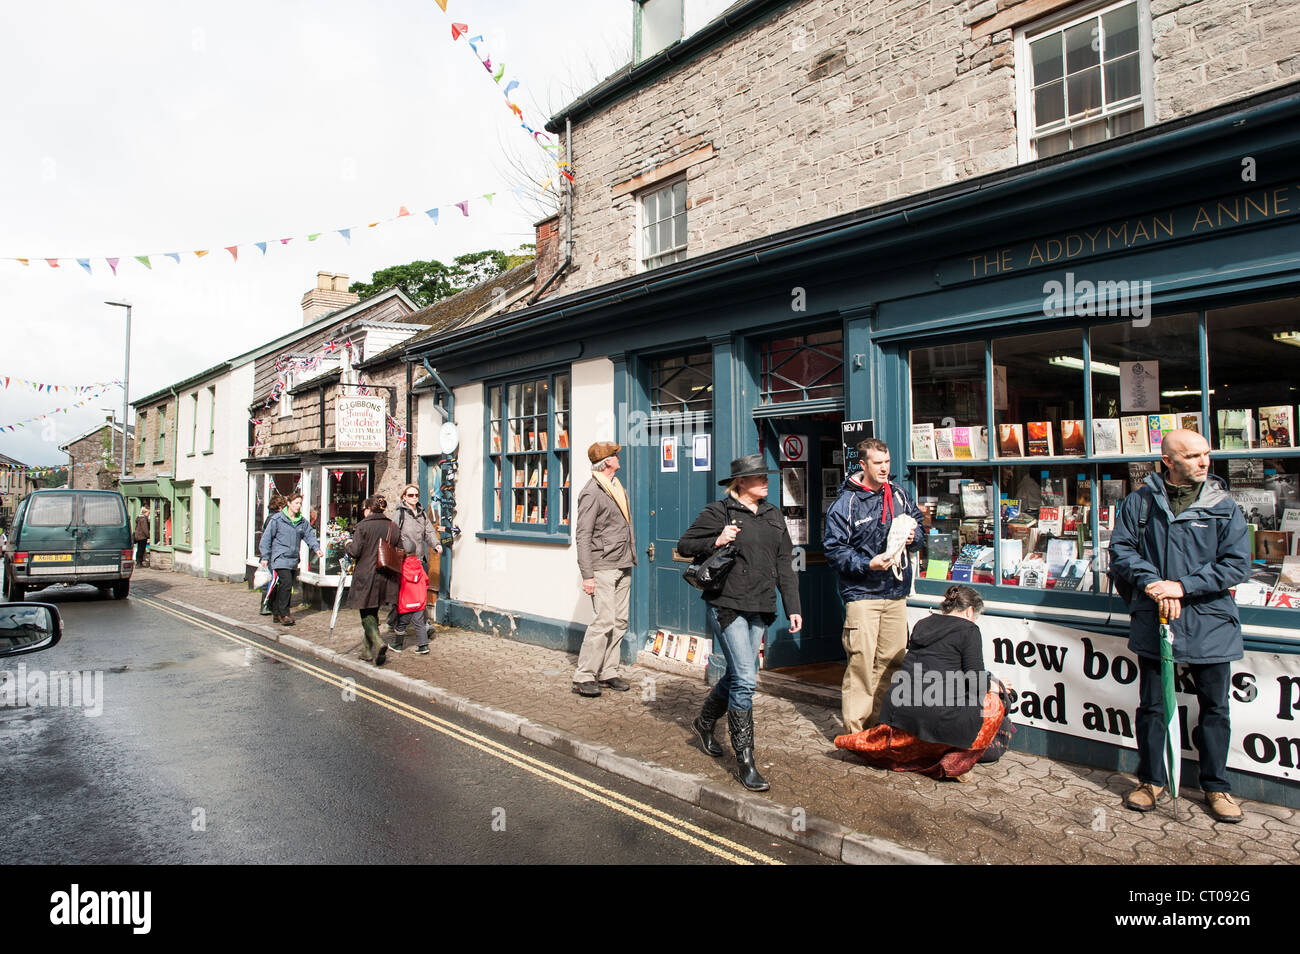 HAY-ON-WYE, Wales - Book shop in Hay-on-Wye in eastern Wales. Described as 'the town of books,' it hosts an annual literary festival known as the Hay Festival. Stock Photo